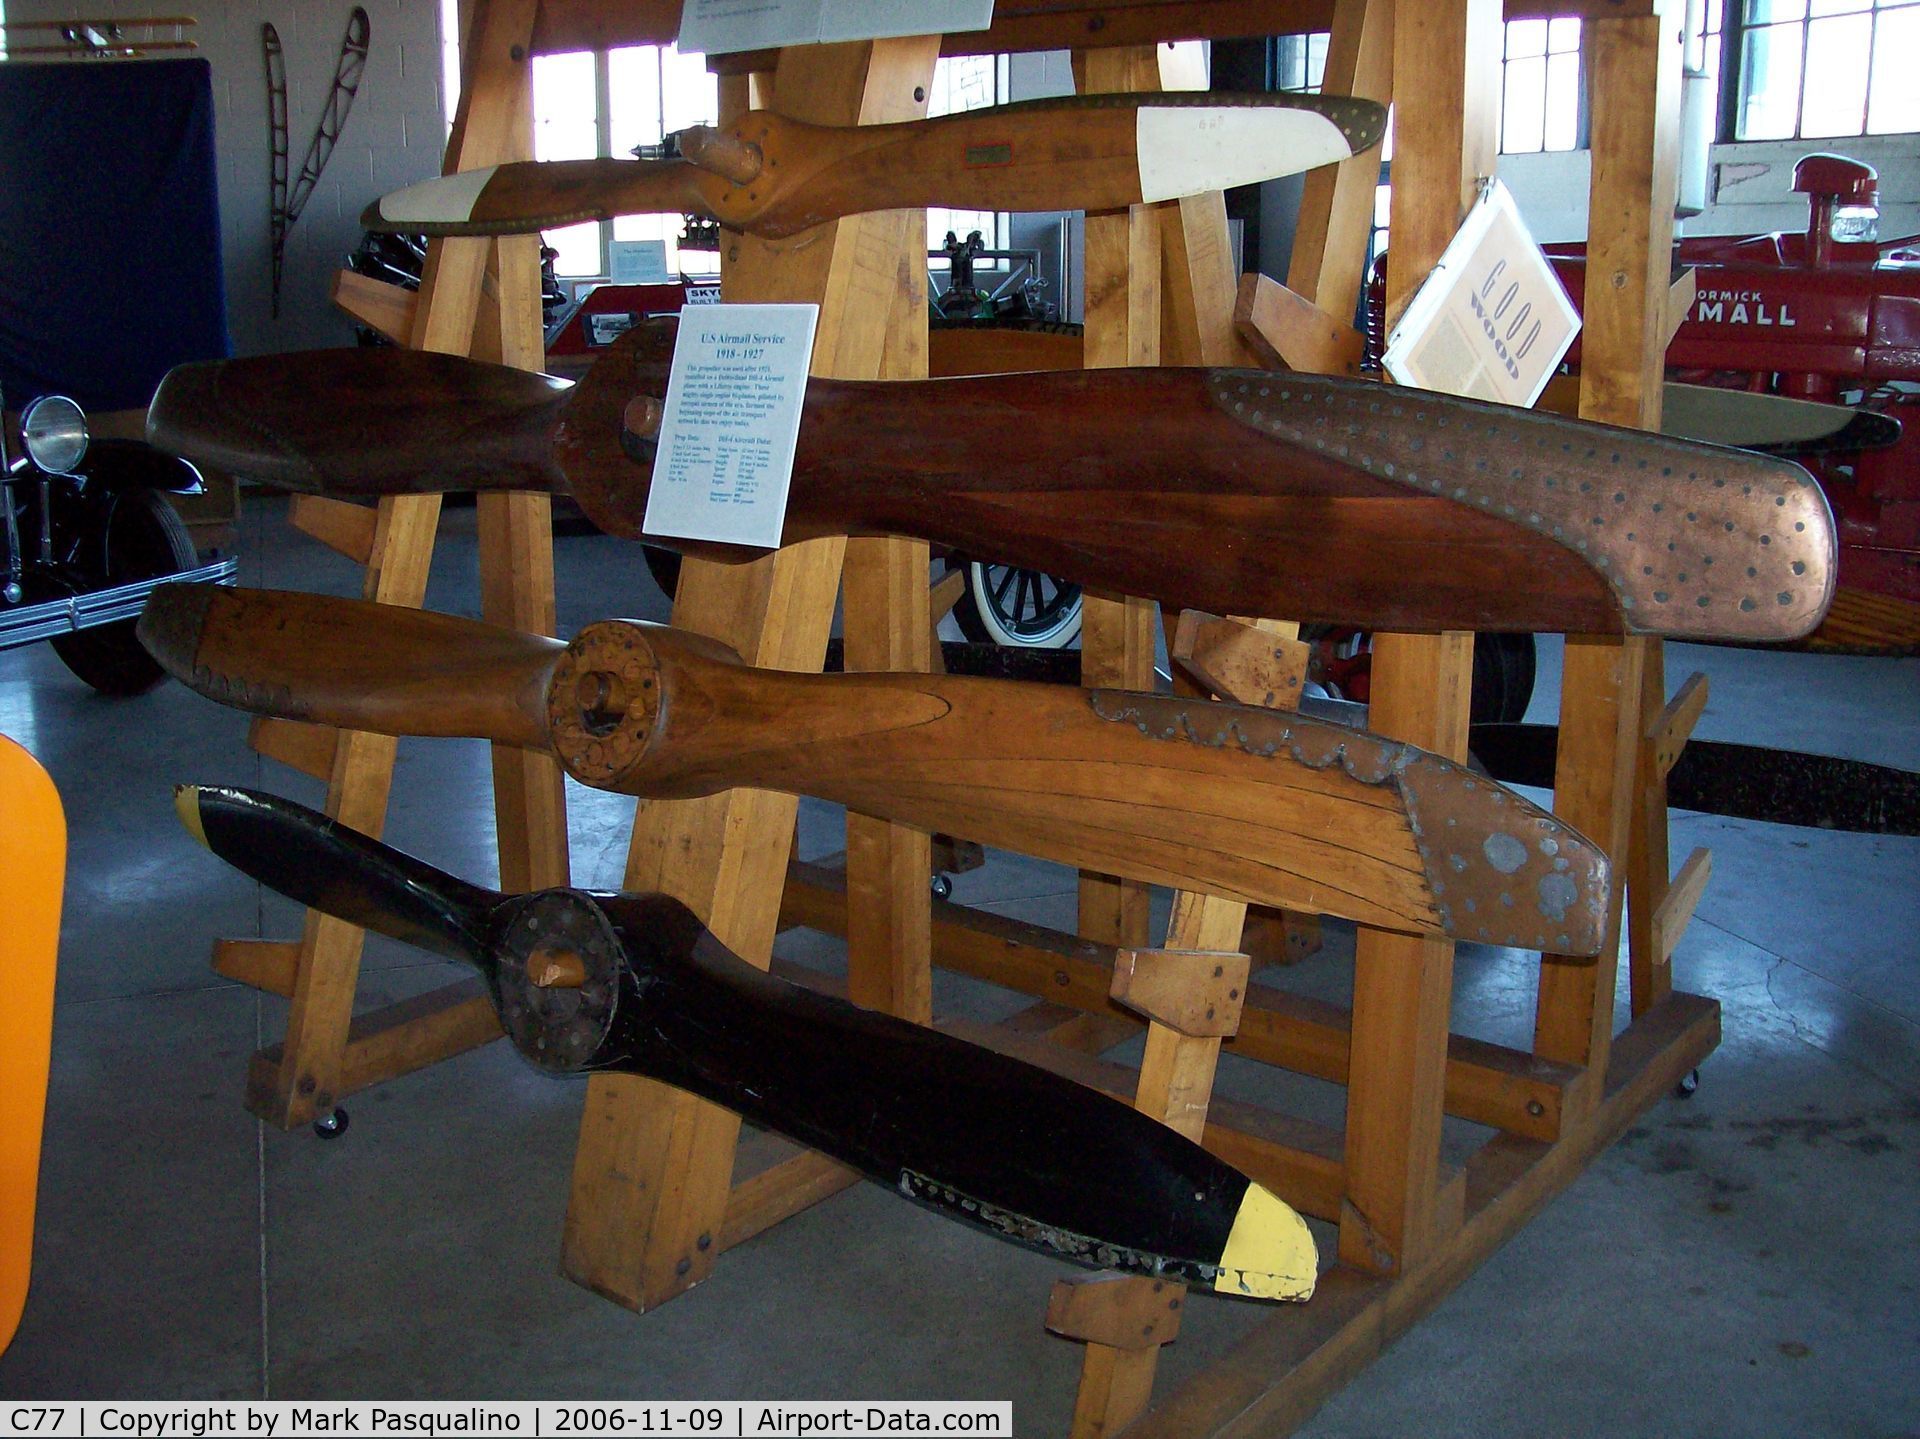 Poplar Grove Airport (C77) - Old propellers on display at air museum